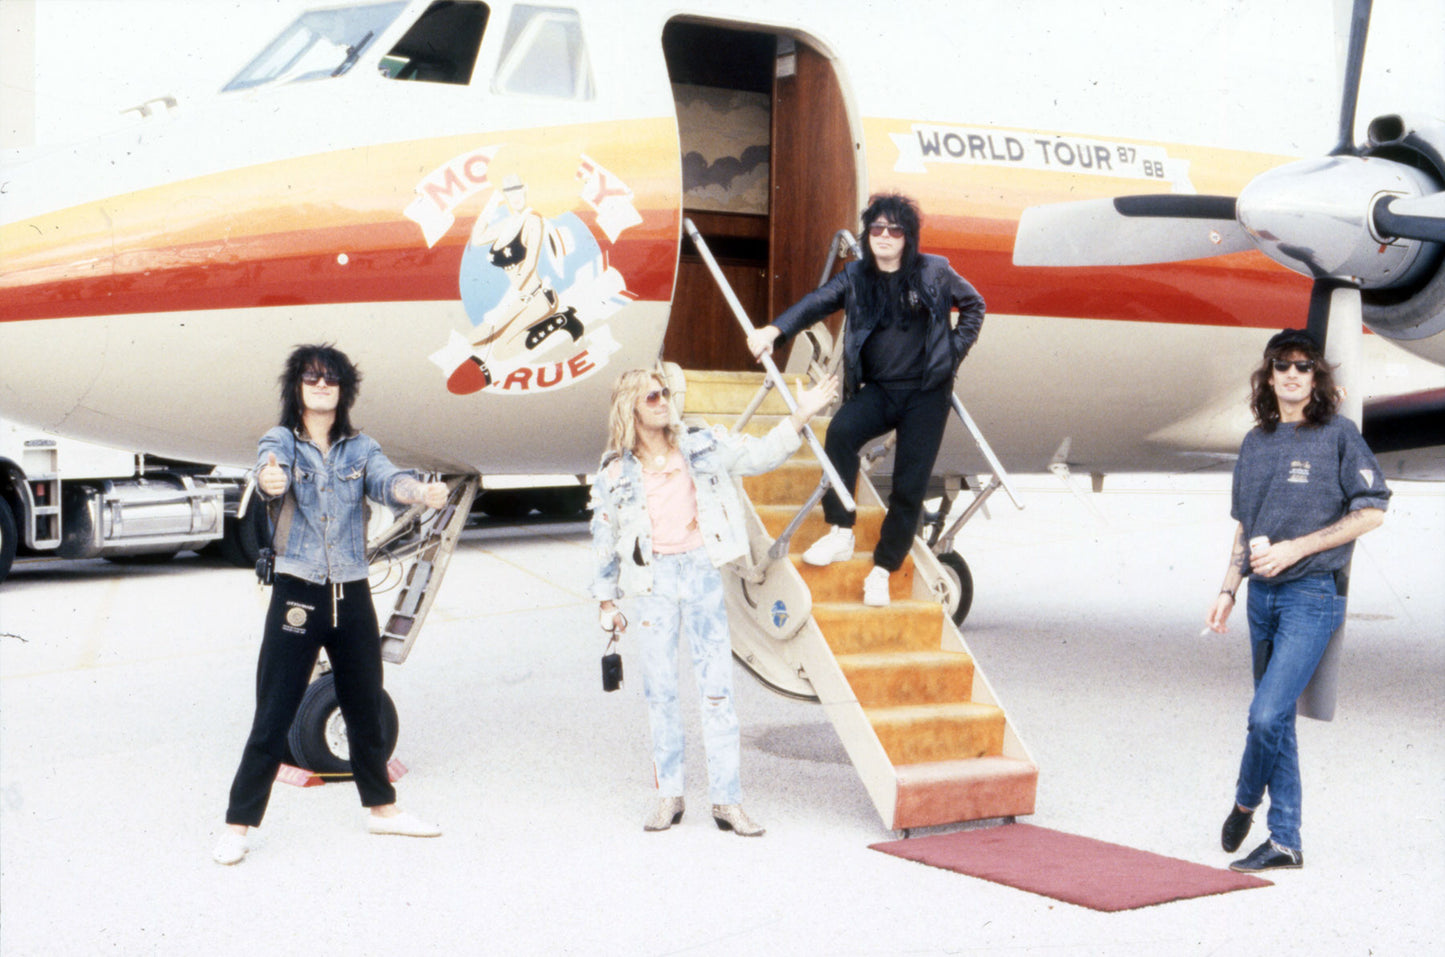 Motley Crue with their private jet for the Girls Girls Girls World Tour 1987-1988